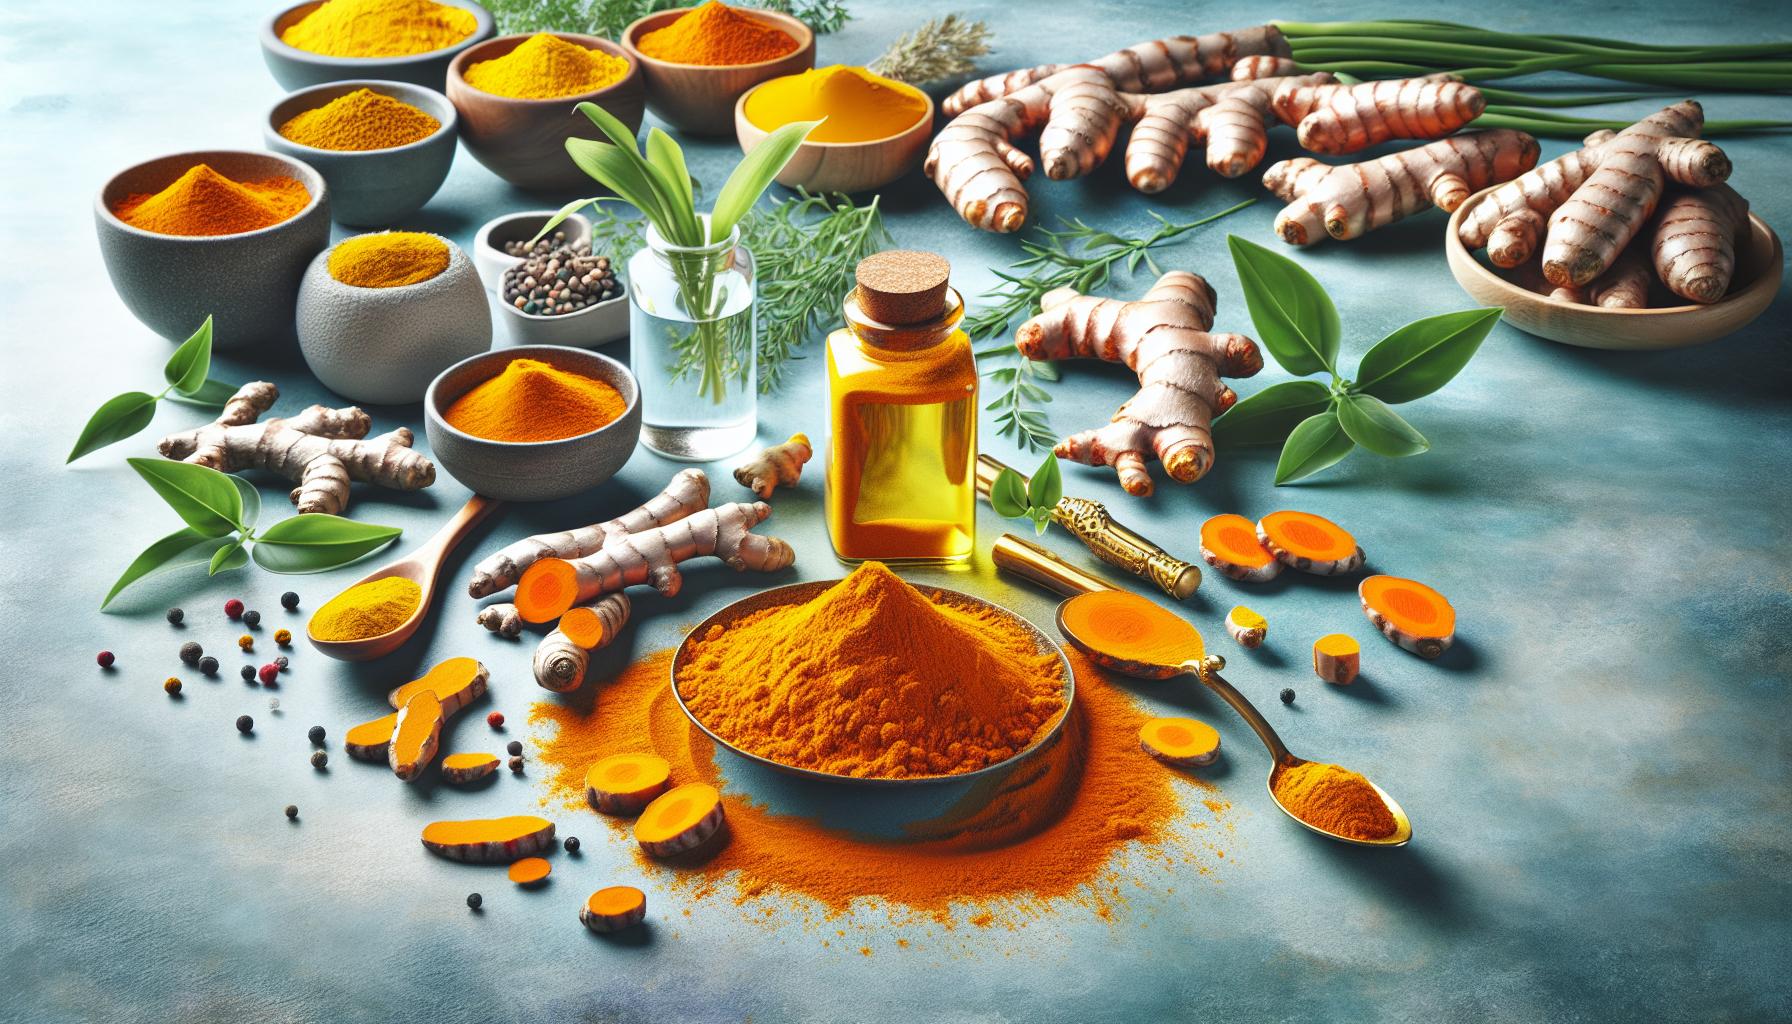 How To Absorb Turmeric Powder